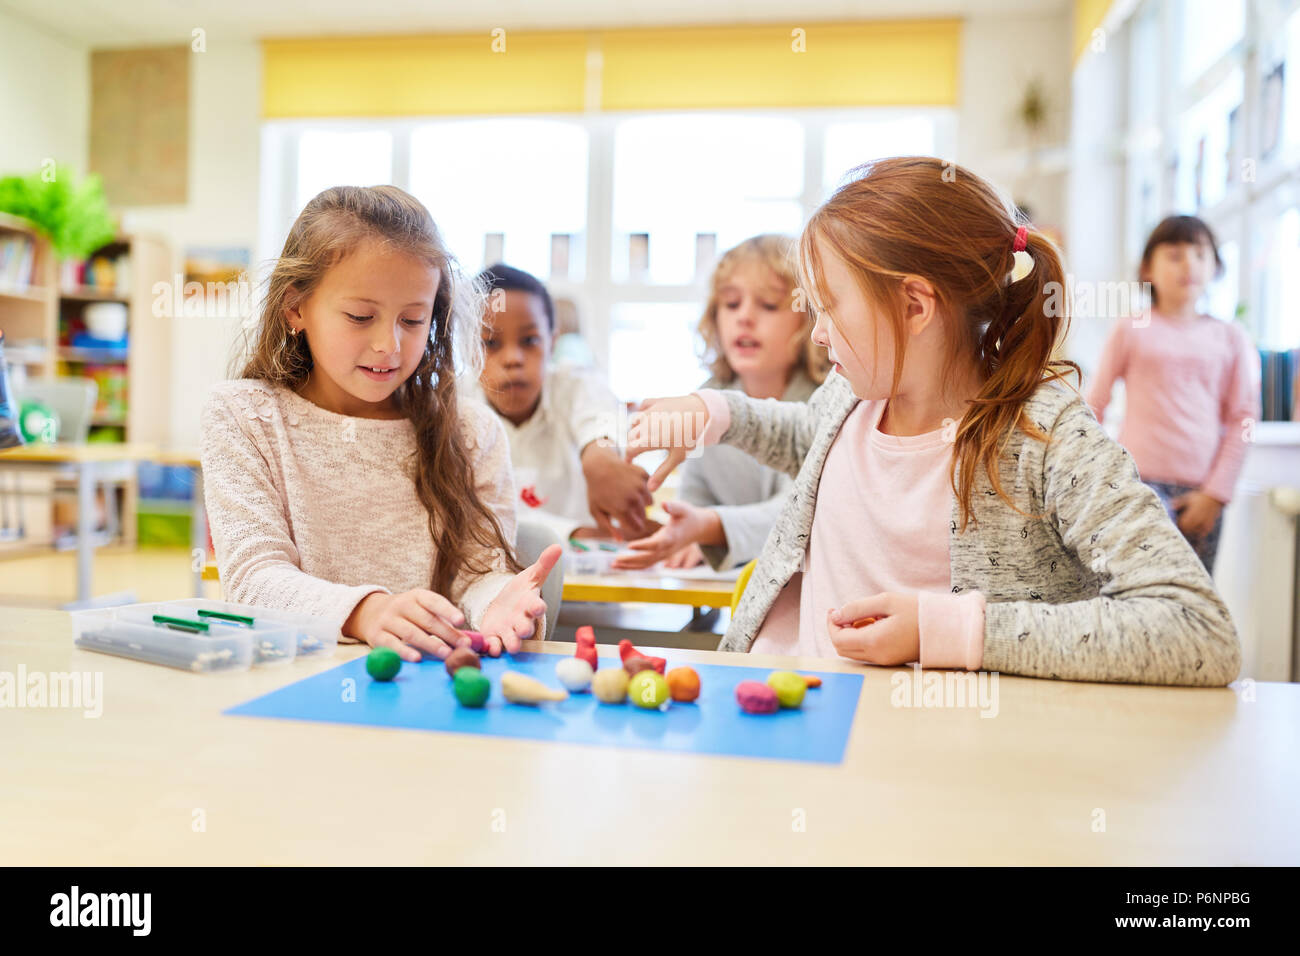 Children play and study together in a preschool or kindergarten Stock Photo